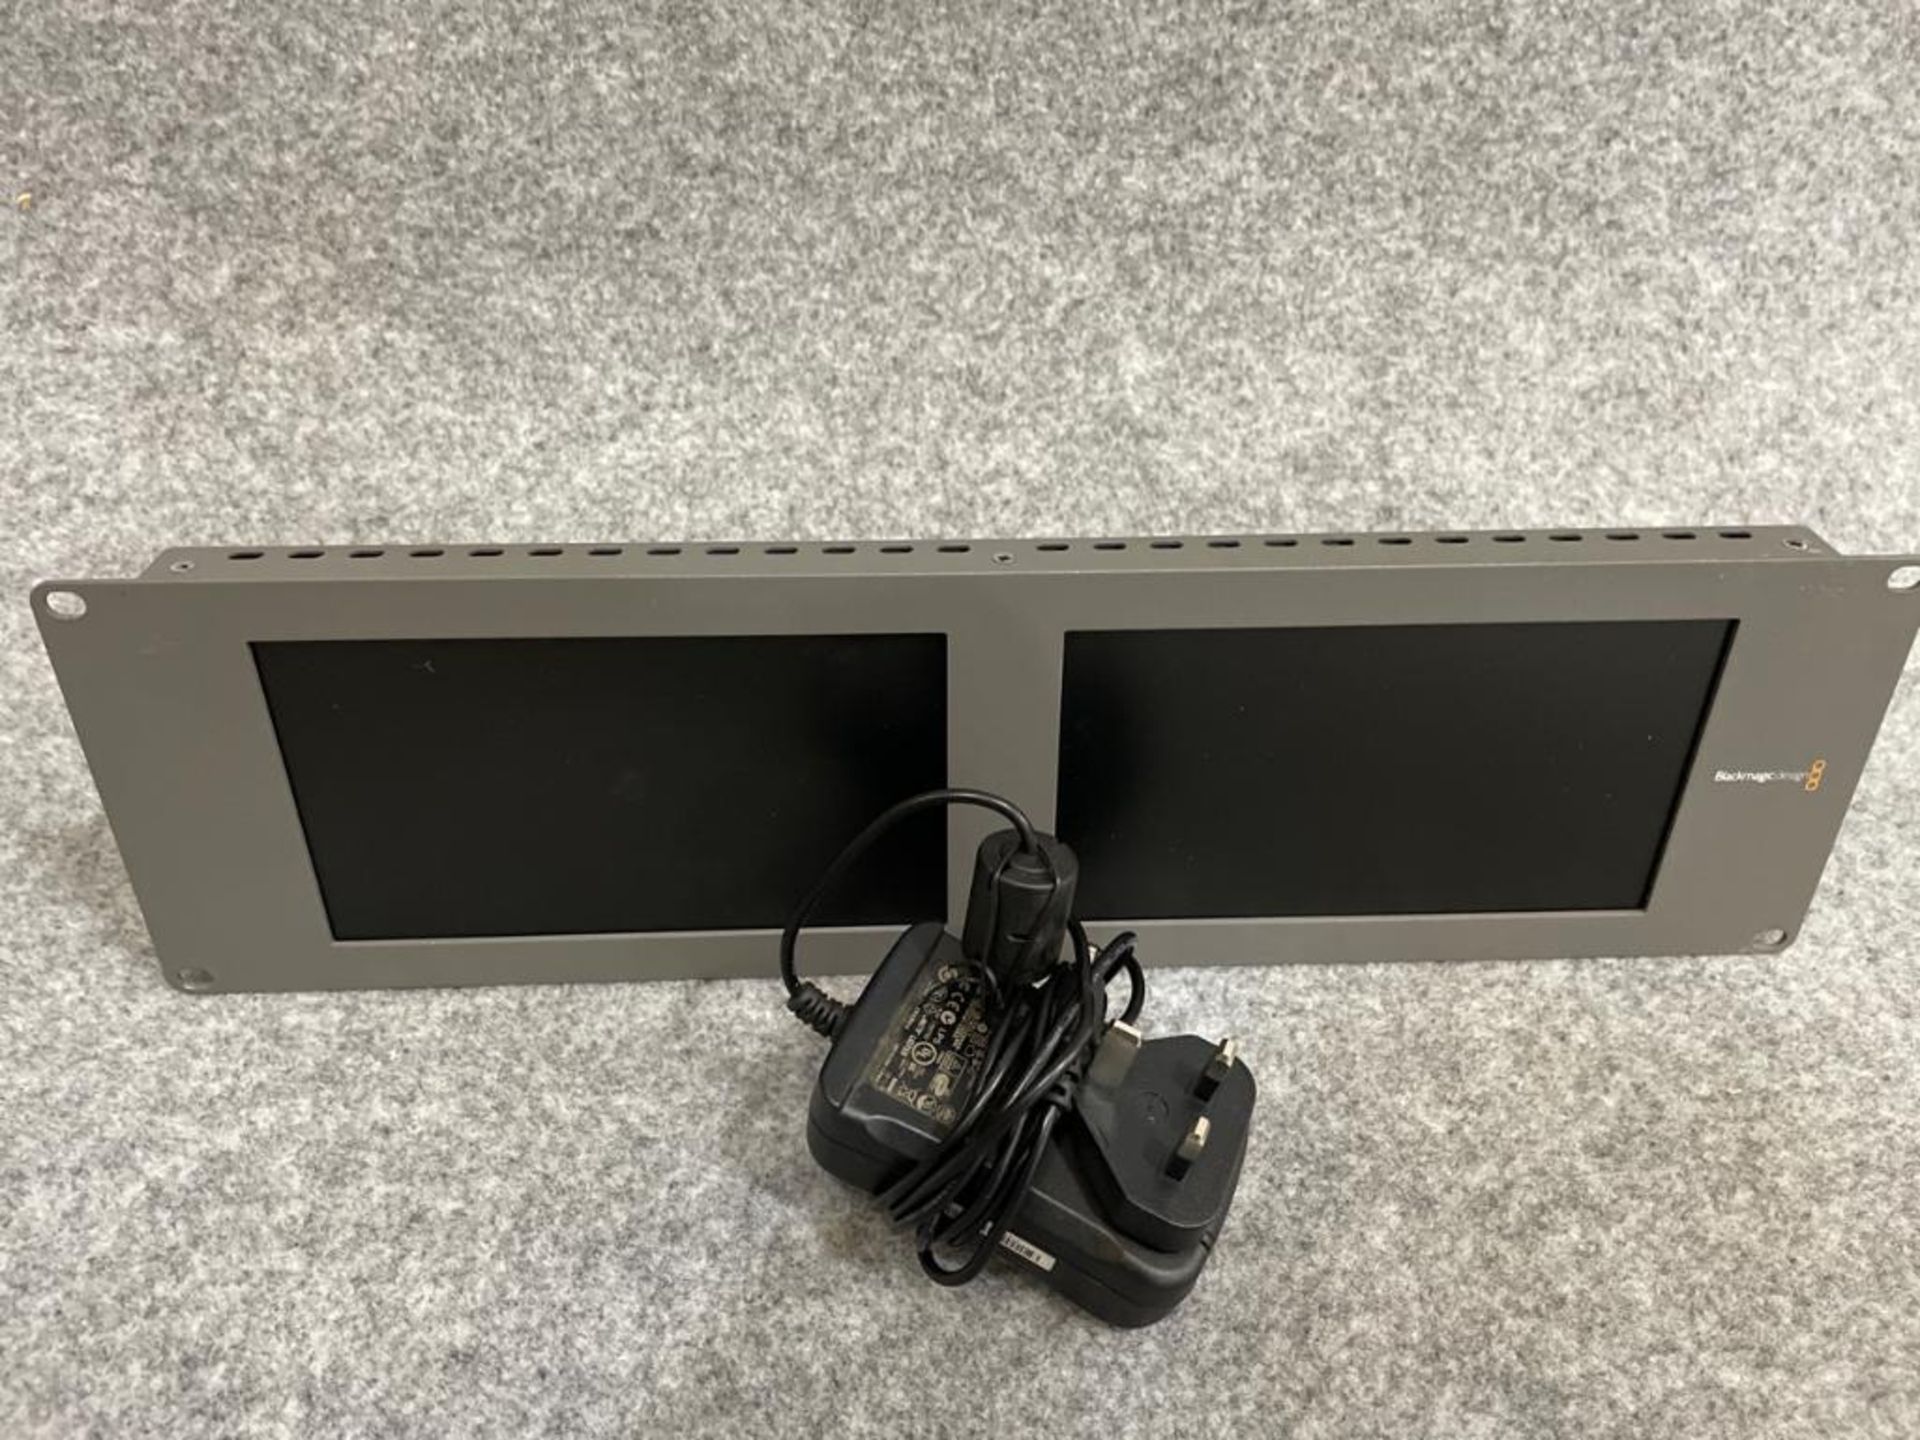 BlackMagic Dual HD Monitor with power supply SN: 1391489 - Image 3 of 3